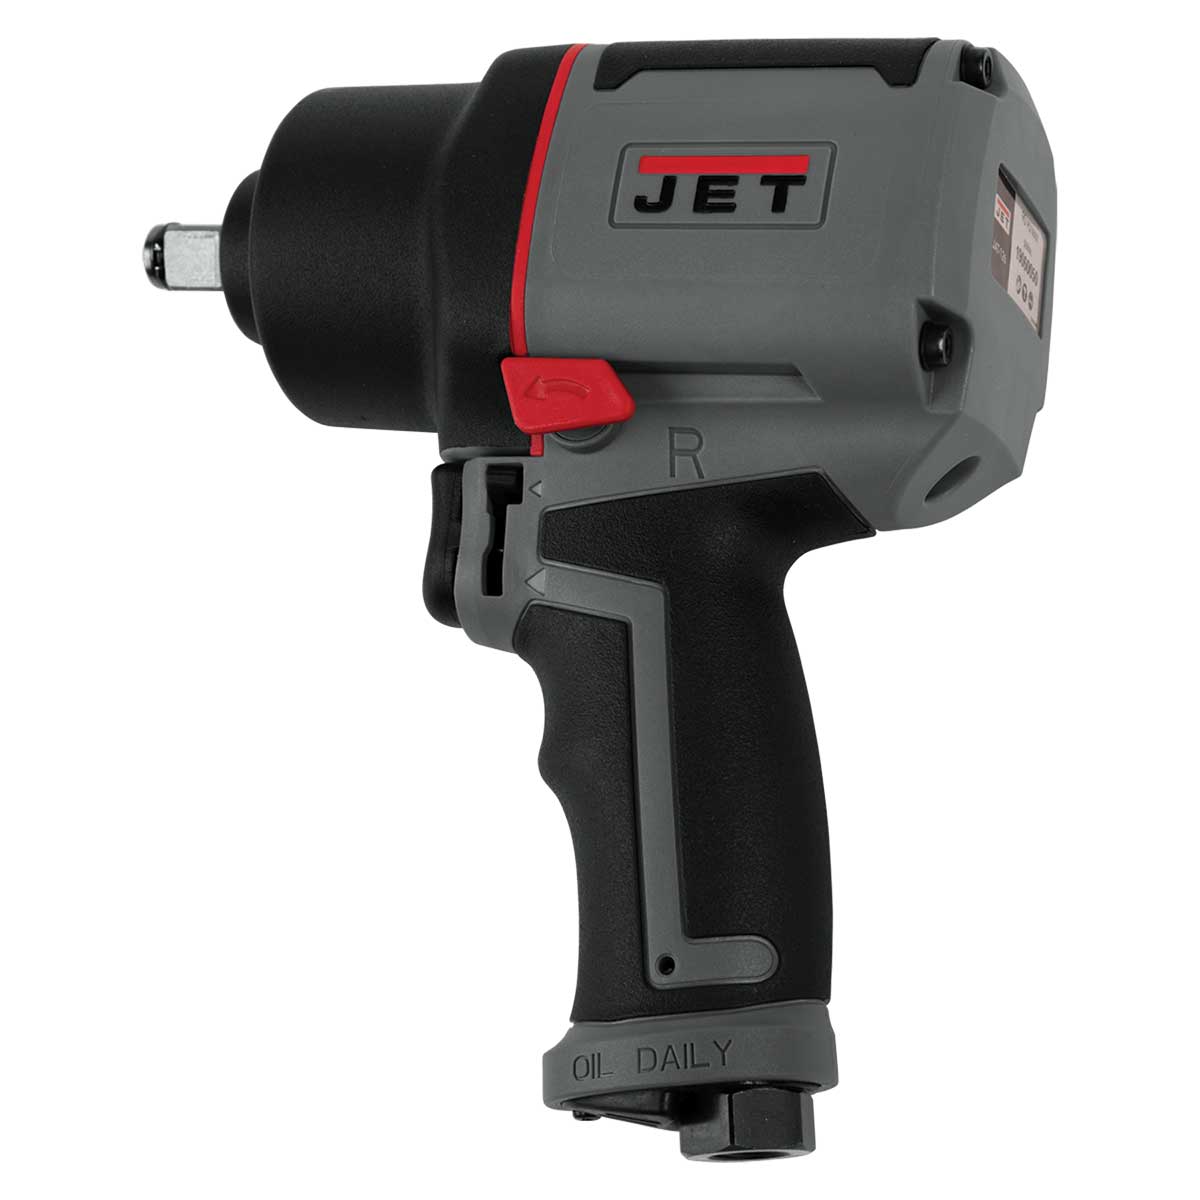 JET 1/2" Composite Air Impact Wrench